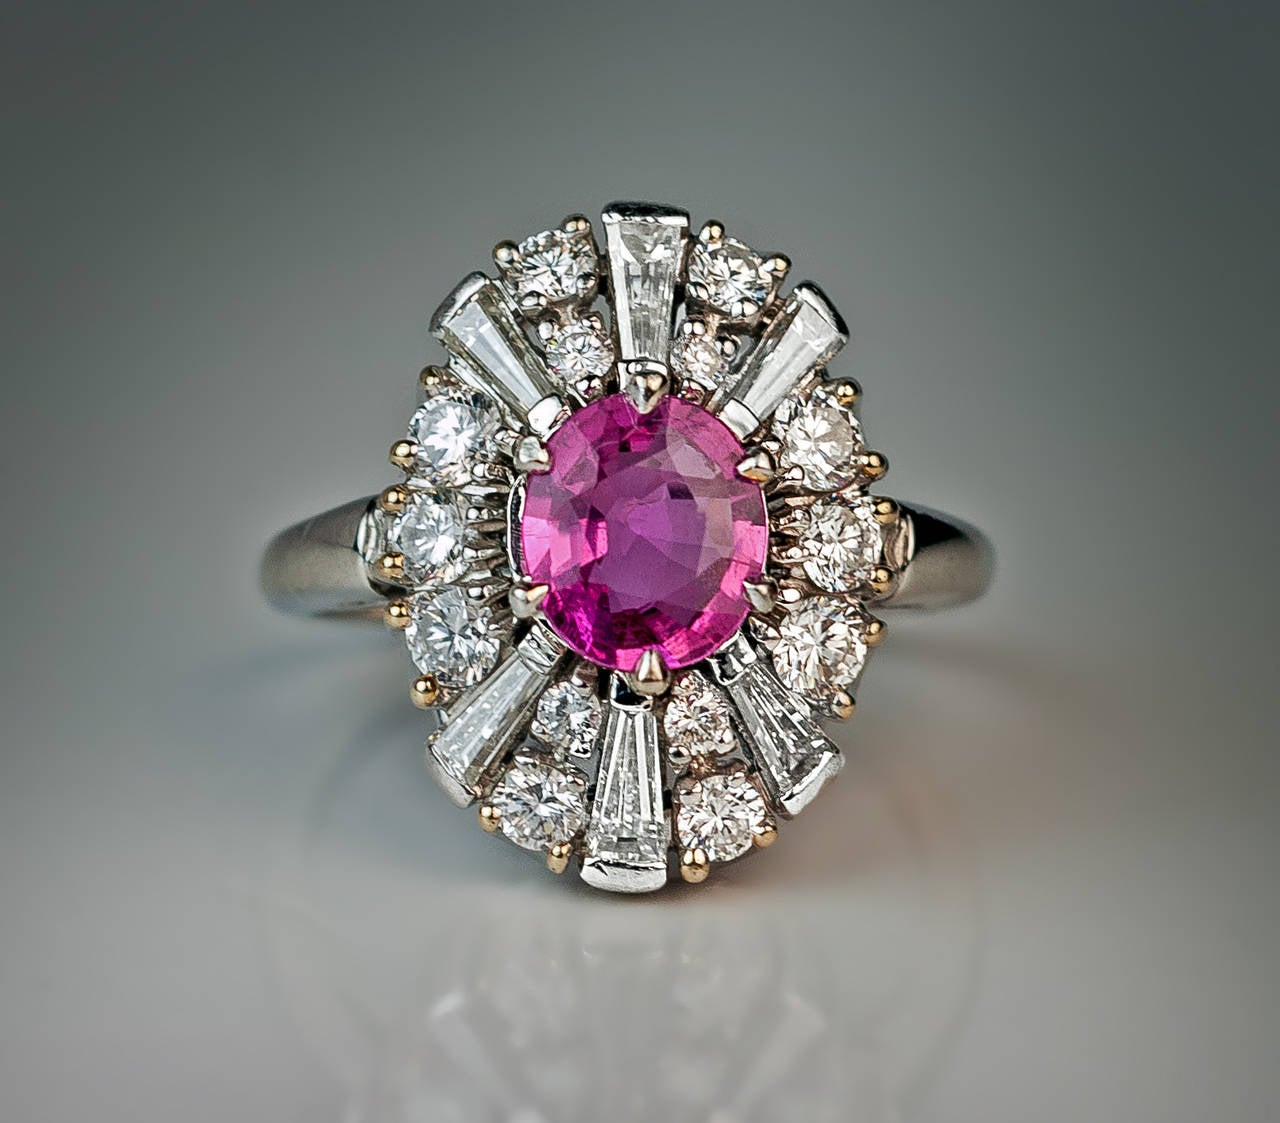 mid 1900s

 The ring is centered with a pink sapphire (7.2 x 6.3 x 3.2 mm, approximately 1.16 ct)vframed by round brilliant diamonds and tapered baguette diamonds.
The outer row of round diamonds is set in gold tipped platinum prongs. 